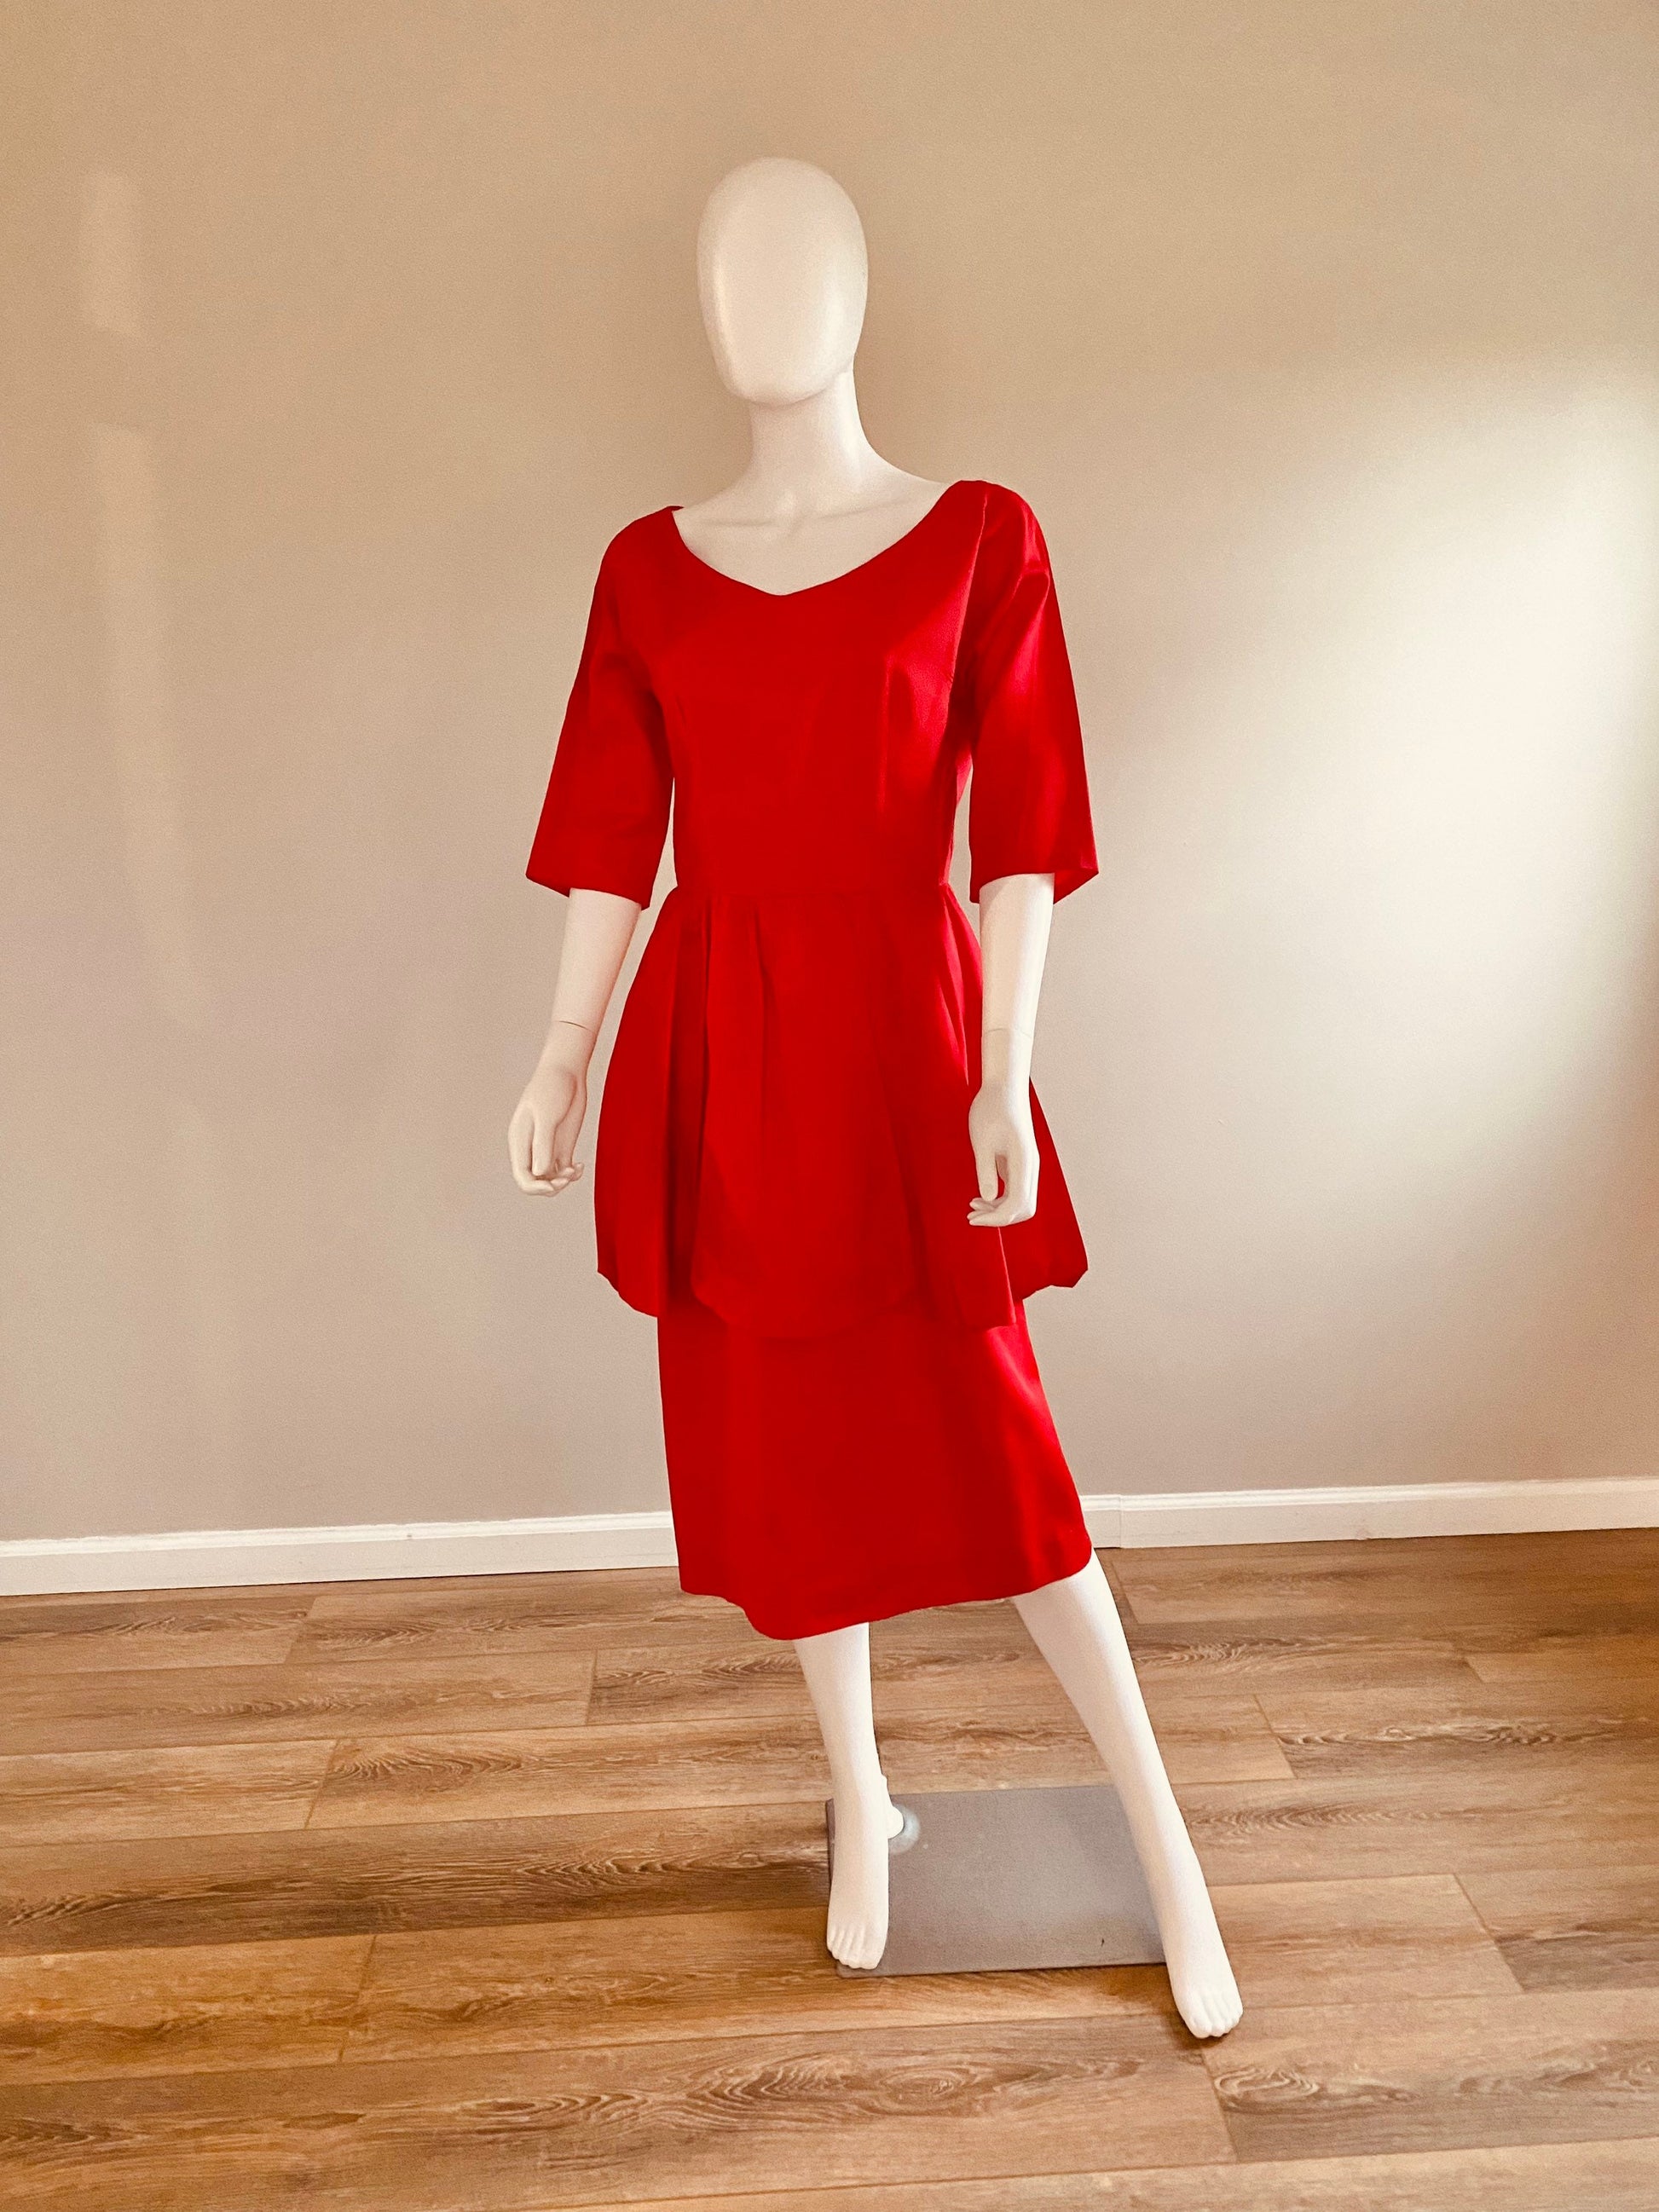 Vintage 1950s Red Wiggle Dress / 50s Holiday Dress / 1950s Party Dress with Peplum / Size M